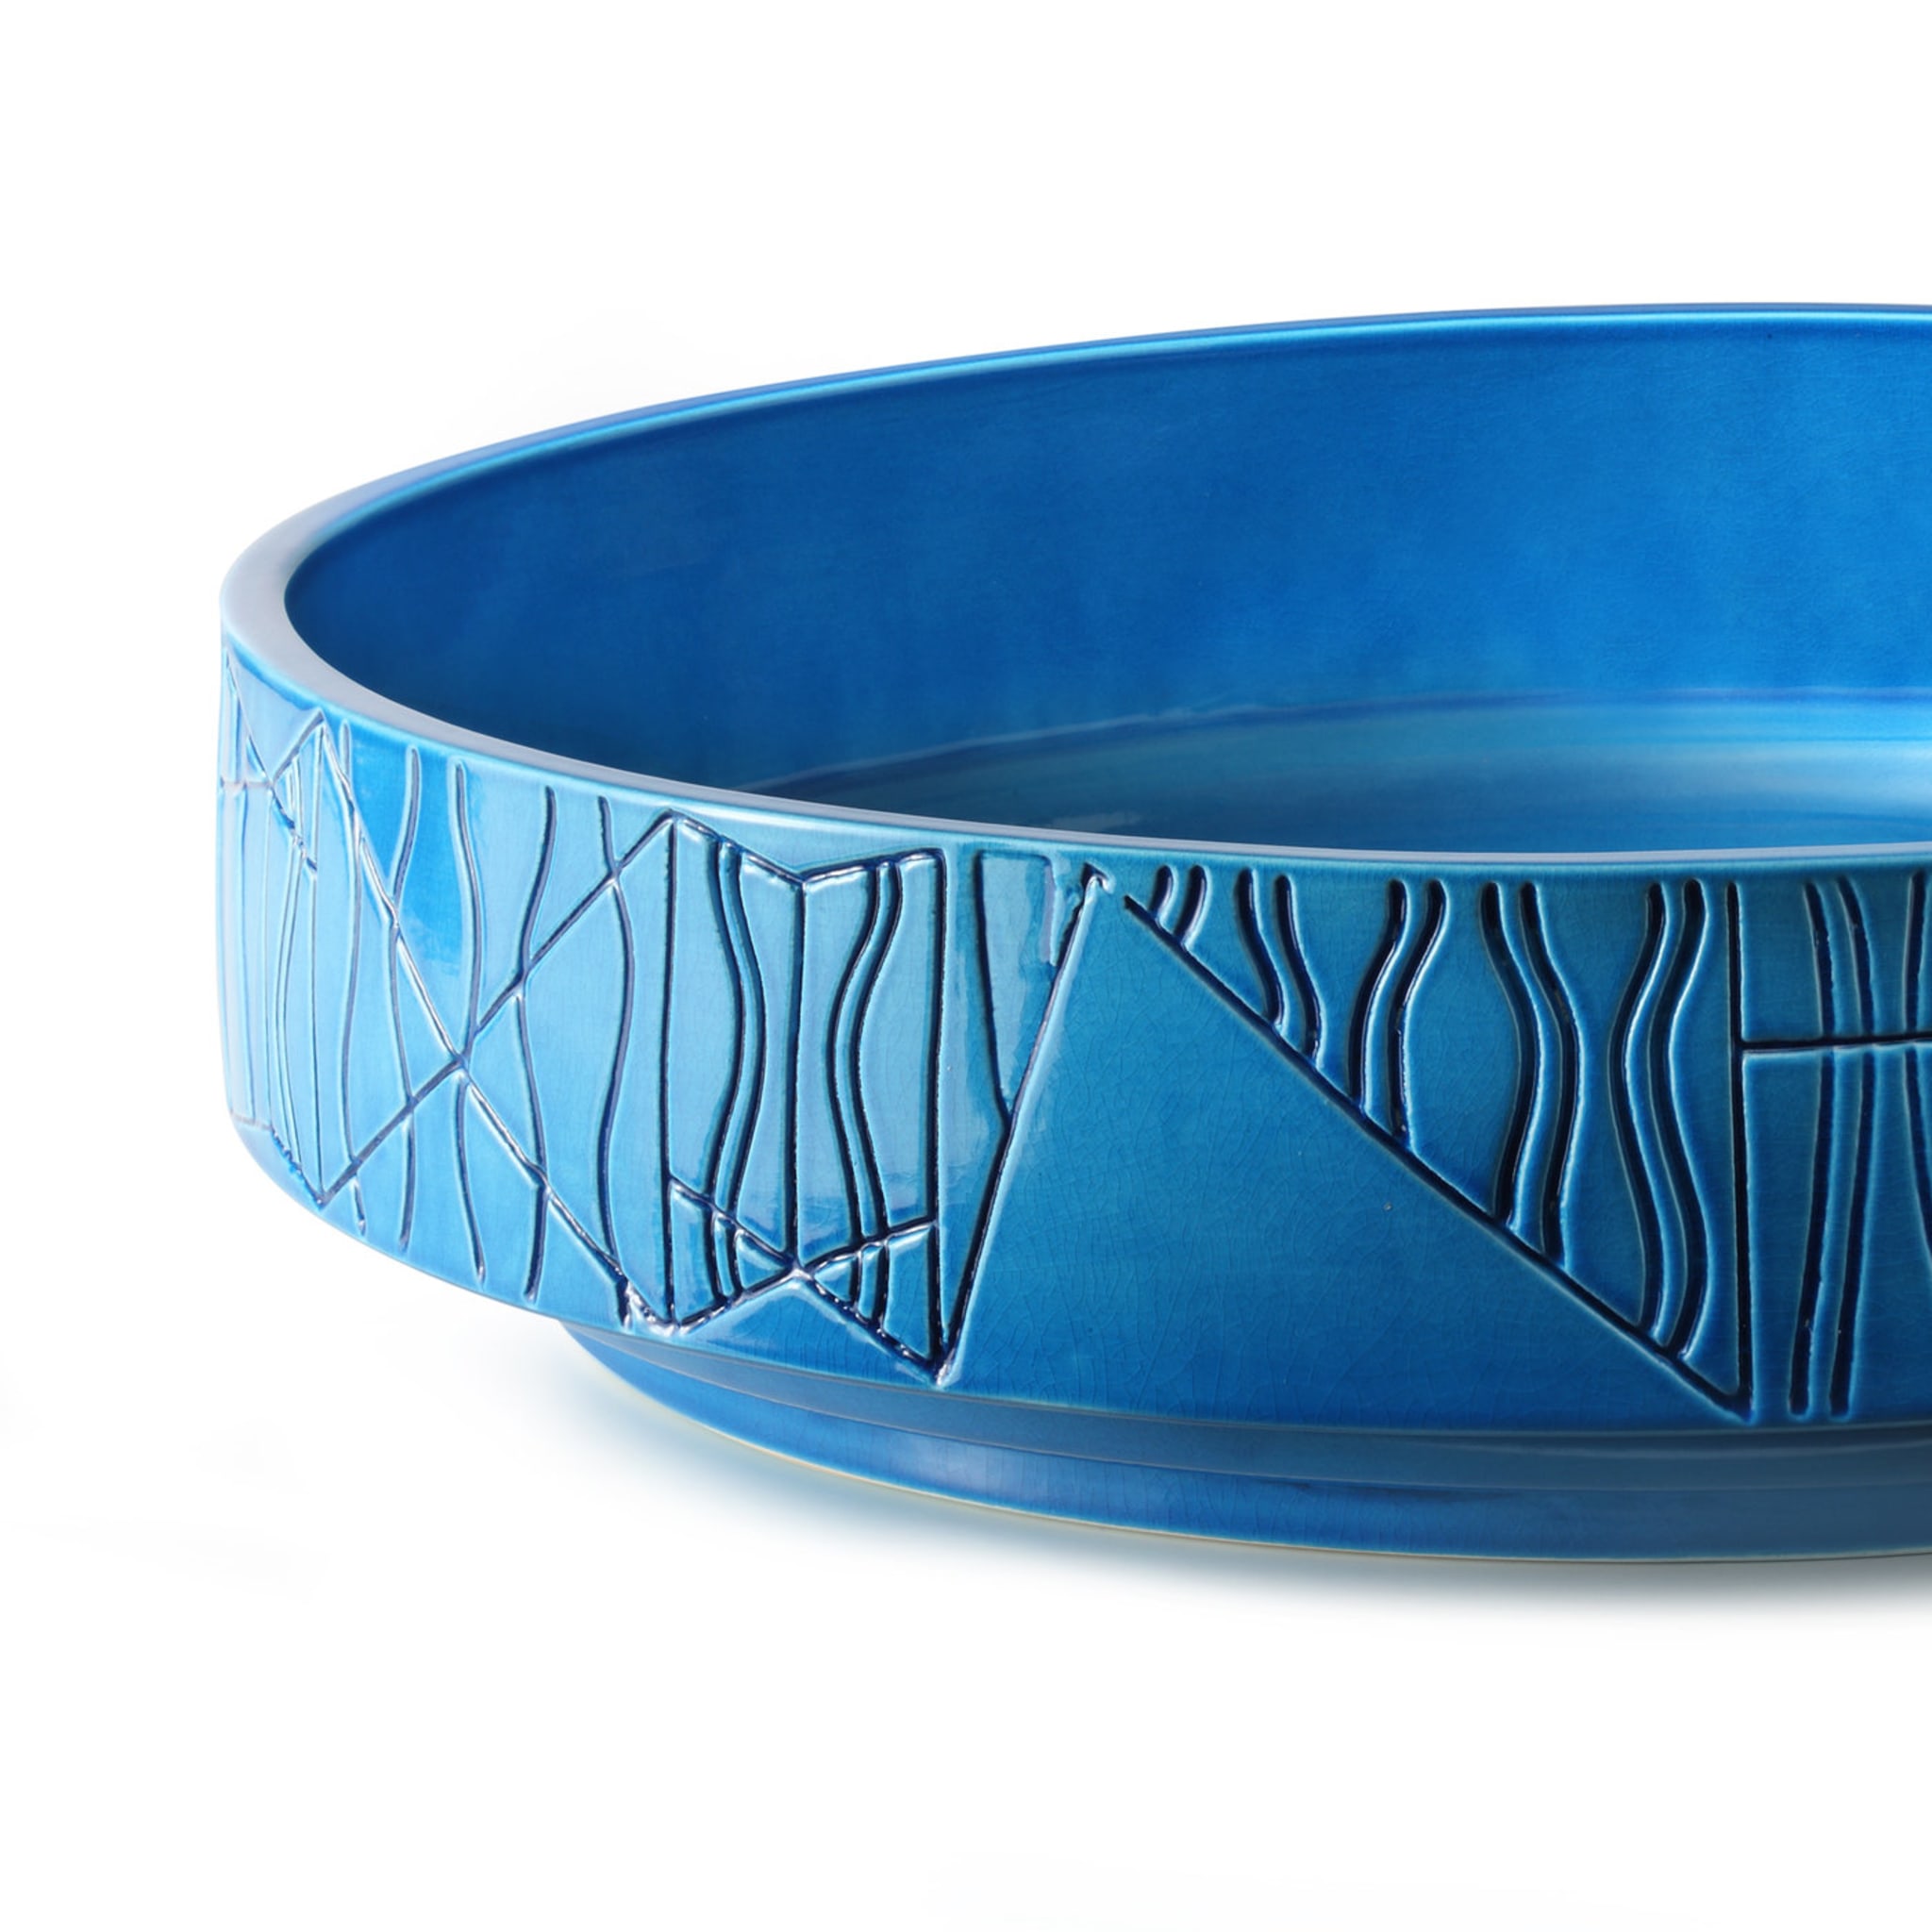 Blue Bowl by Bethan Laura Wood - Alternative view 1